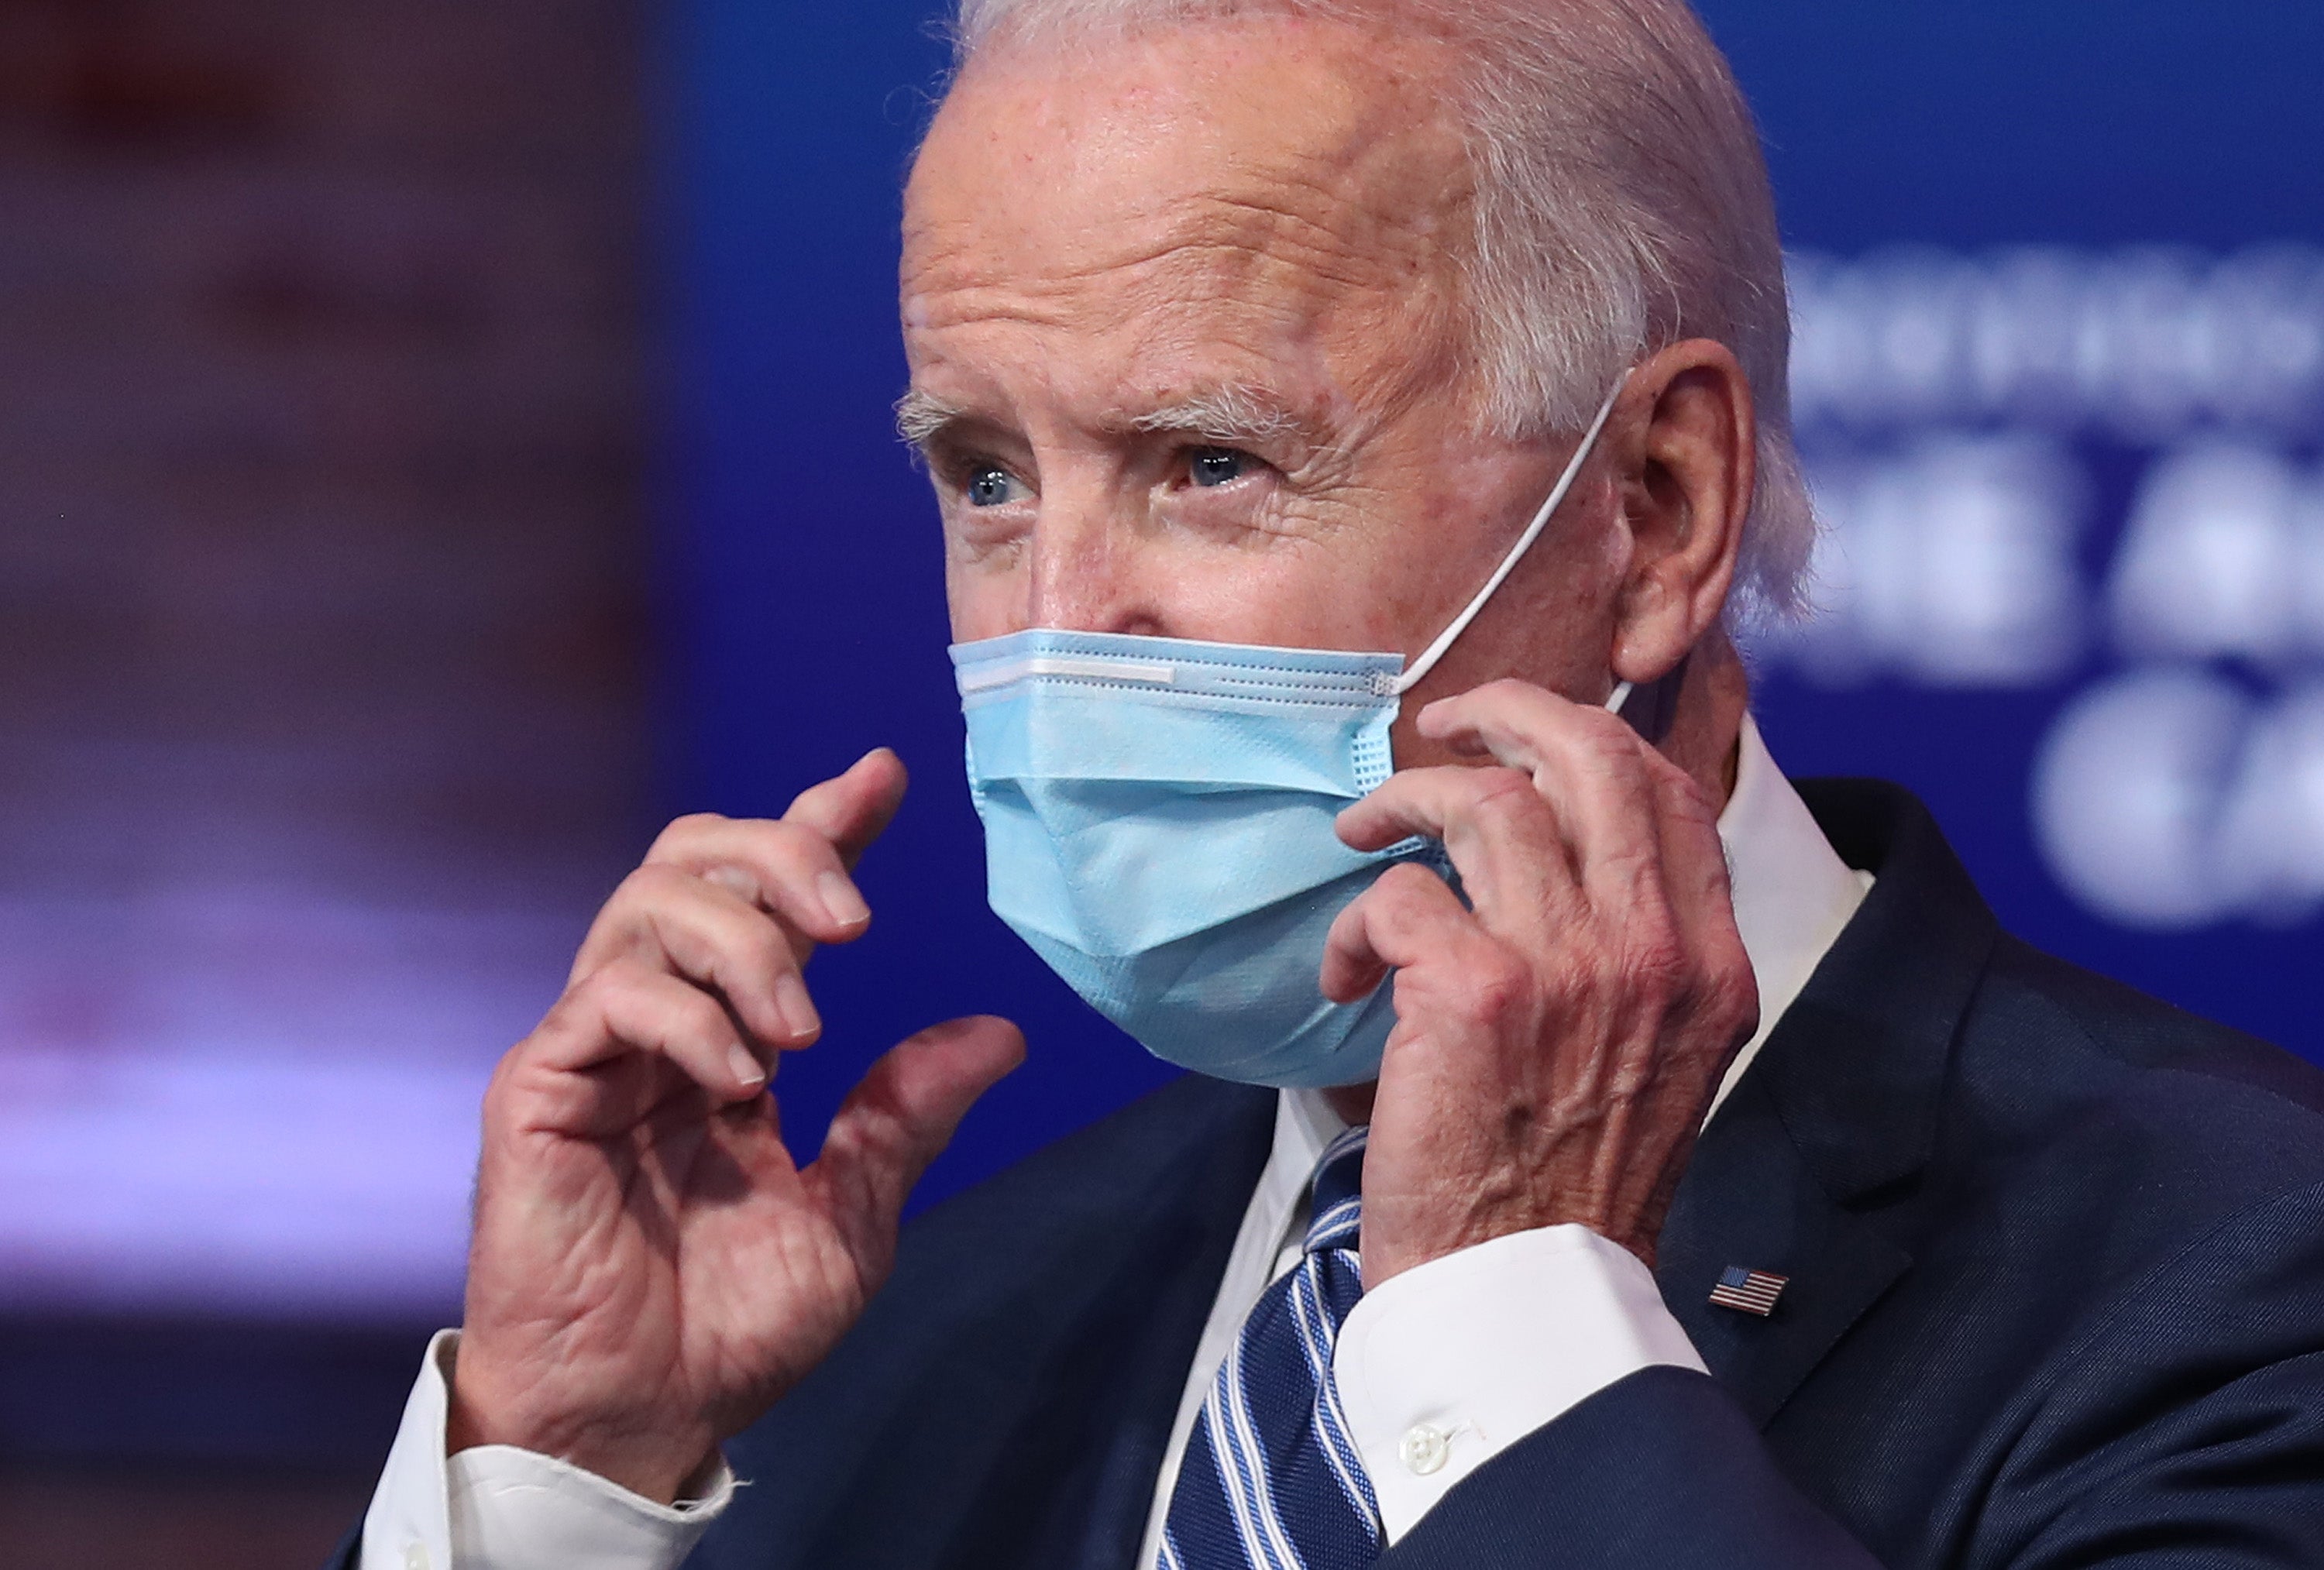 The Joe Biden administration has announced formation of a task force that will investigate any political interference in science during Trump-era.